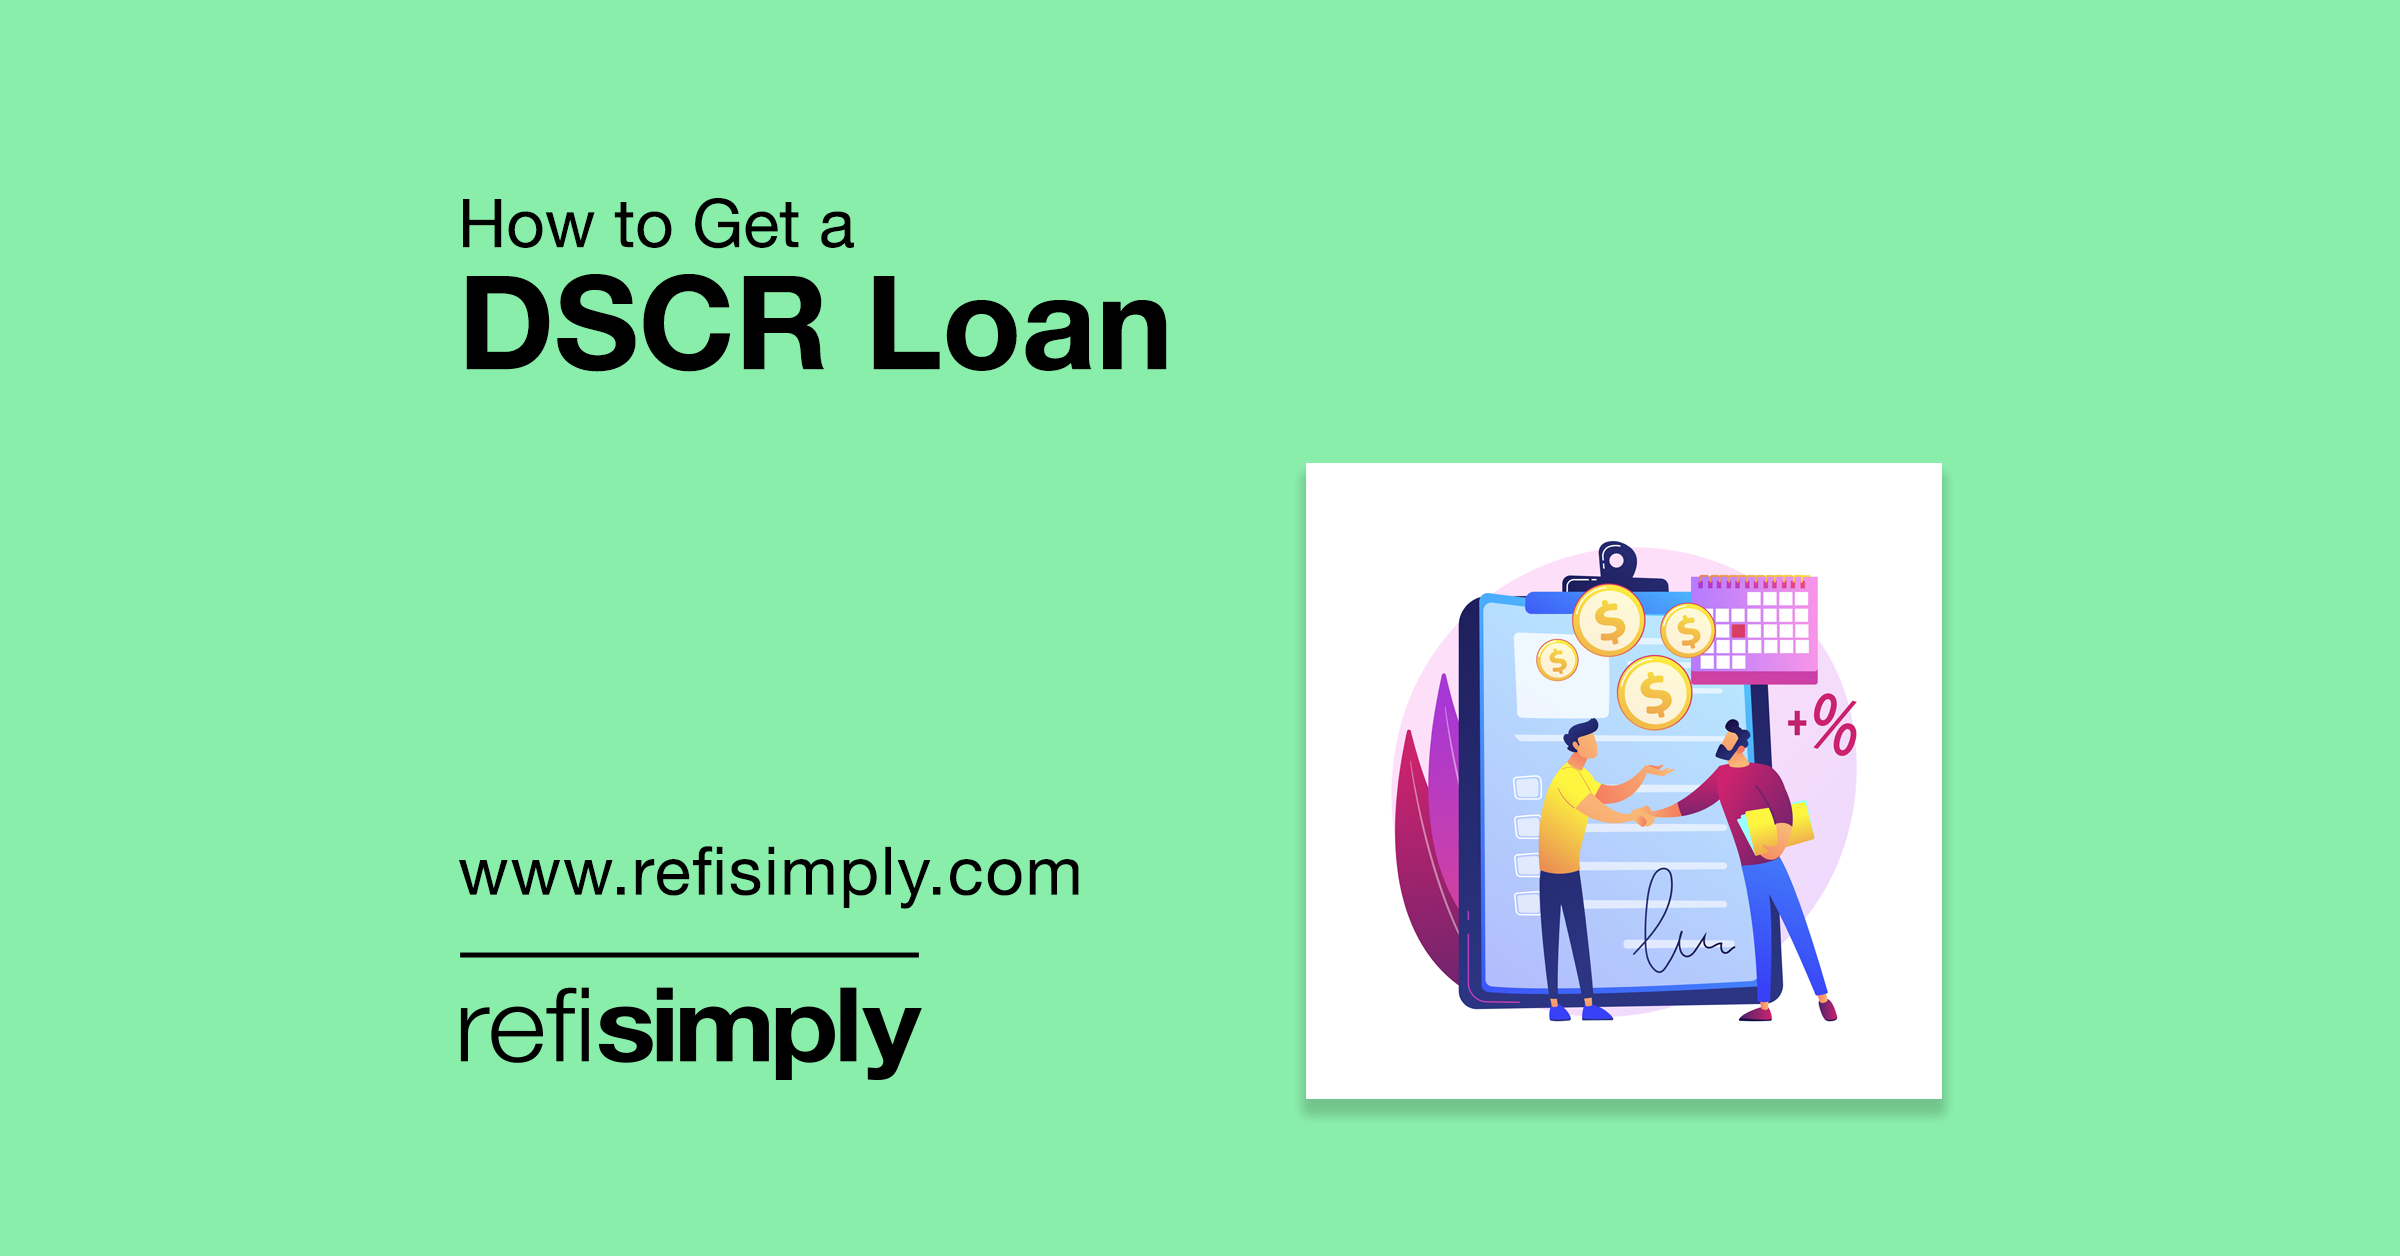 How to get a dscr loan